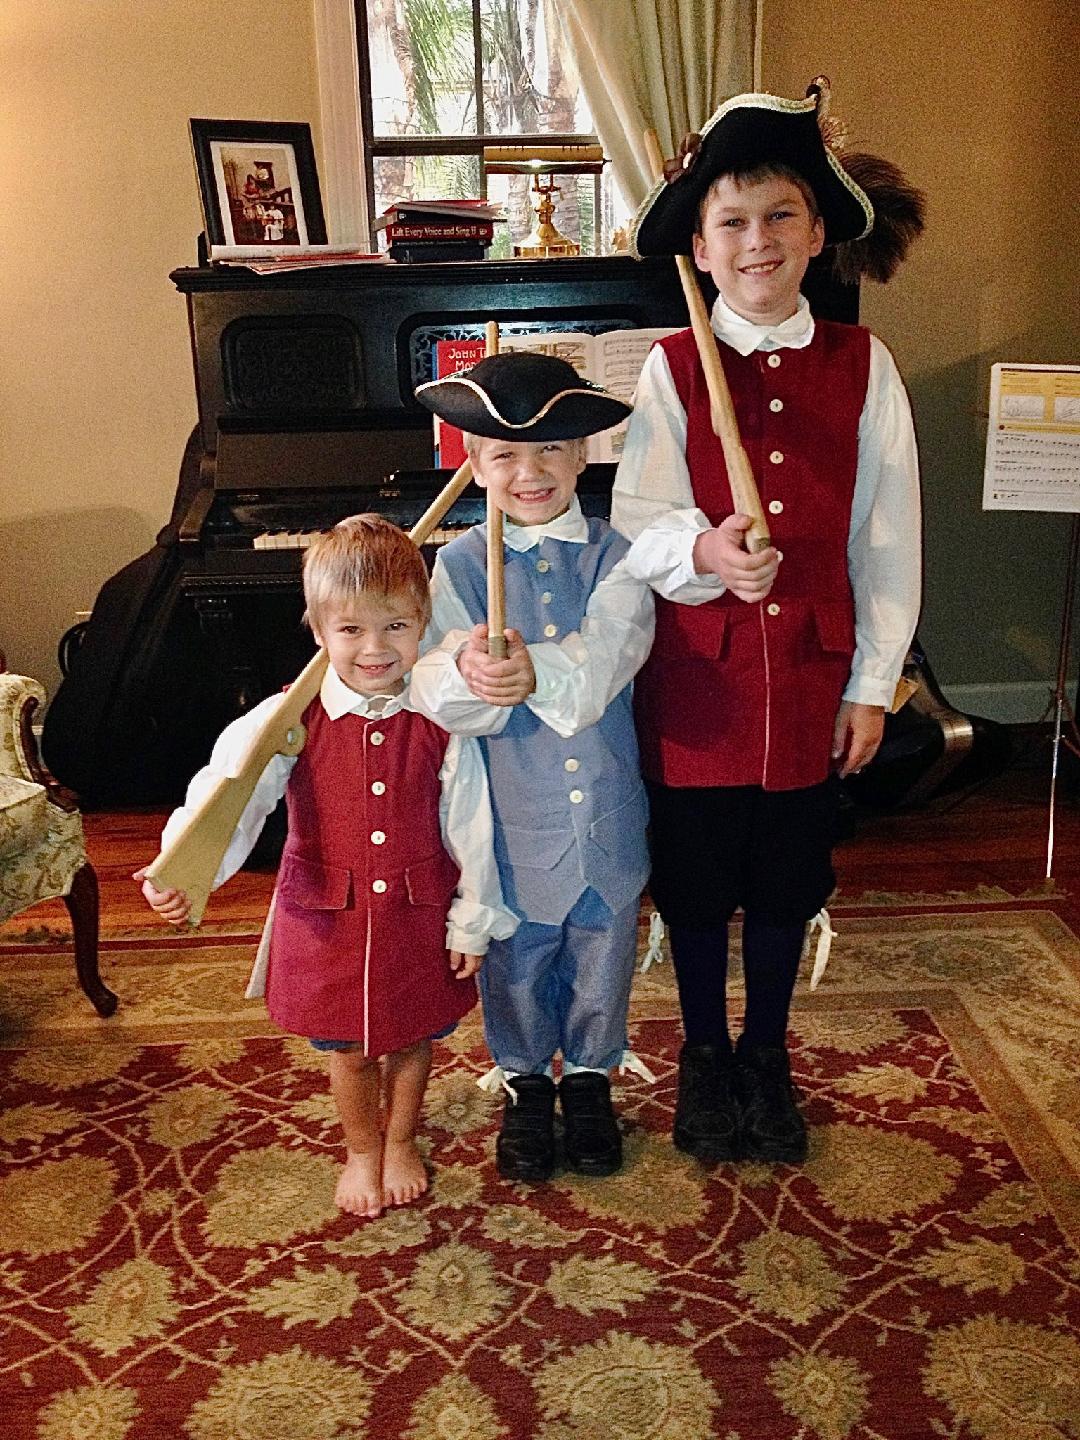 Mouledoux and his brothers dressed up for Halloween after visiting Forst Niagara.